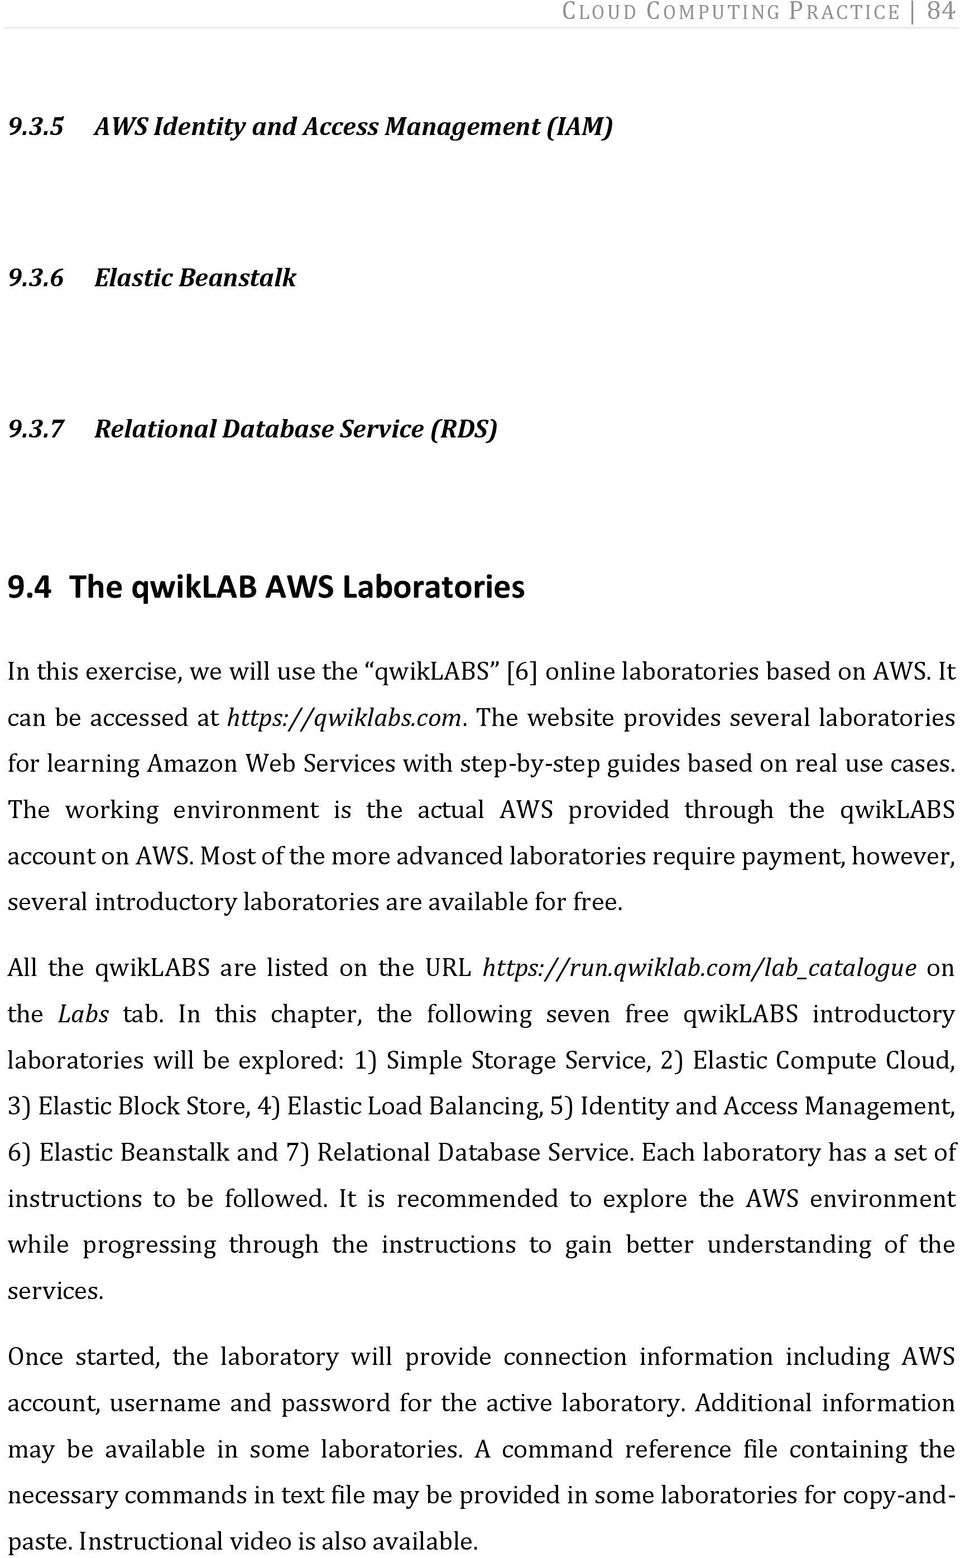 The website provides several laboratories for learning Amazon Web Services with step by step guides based on real use cases.